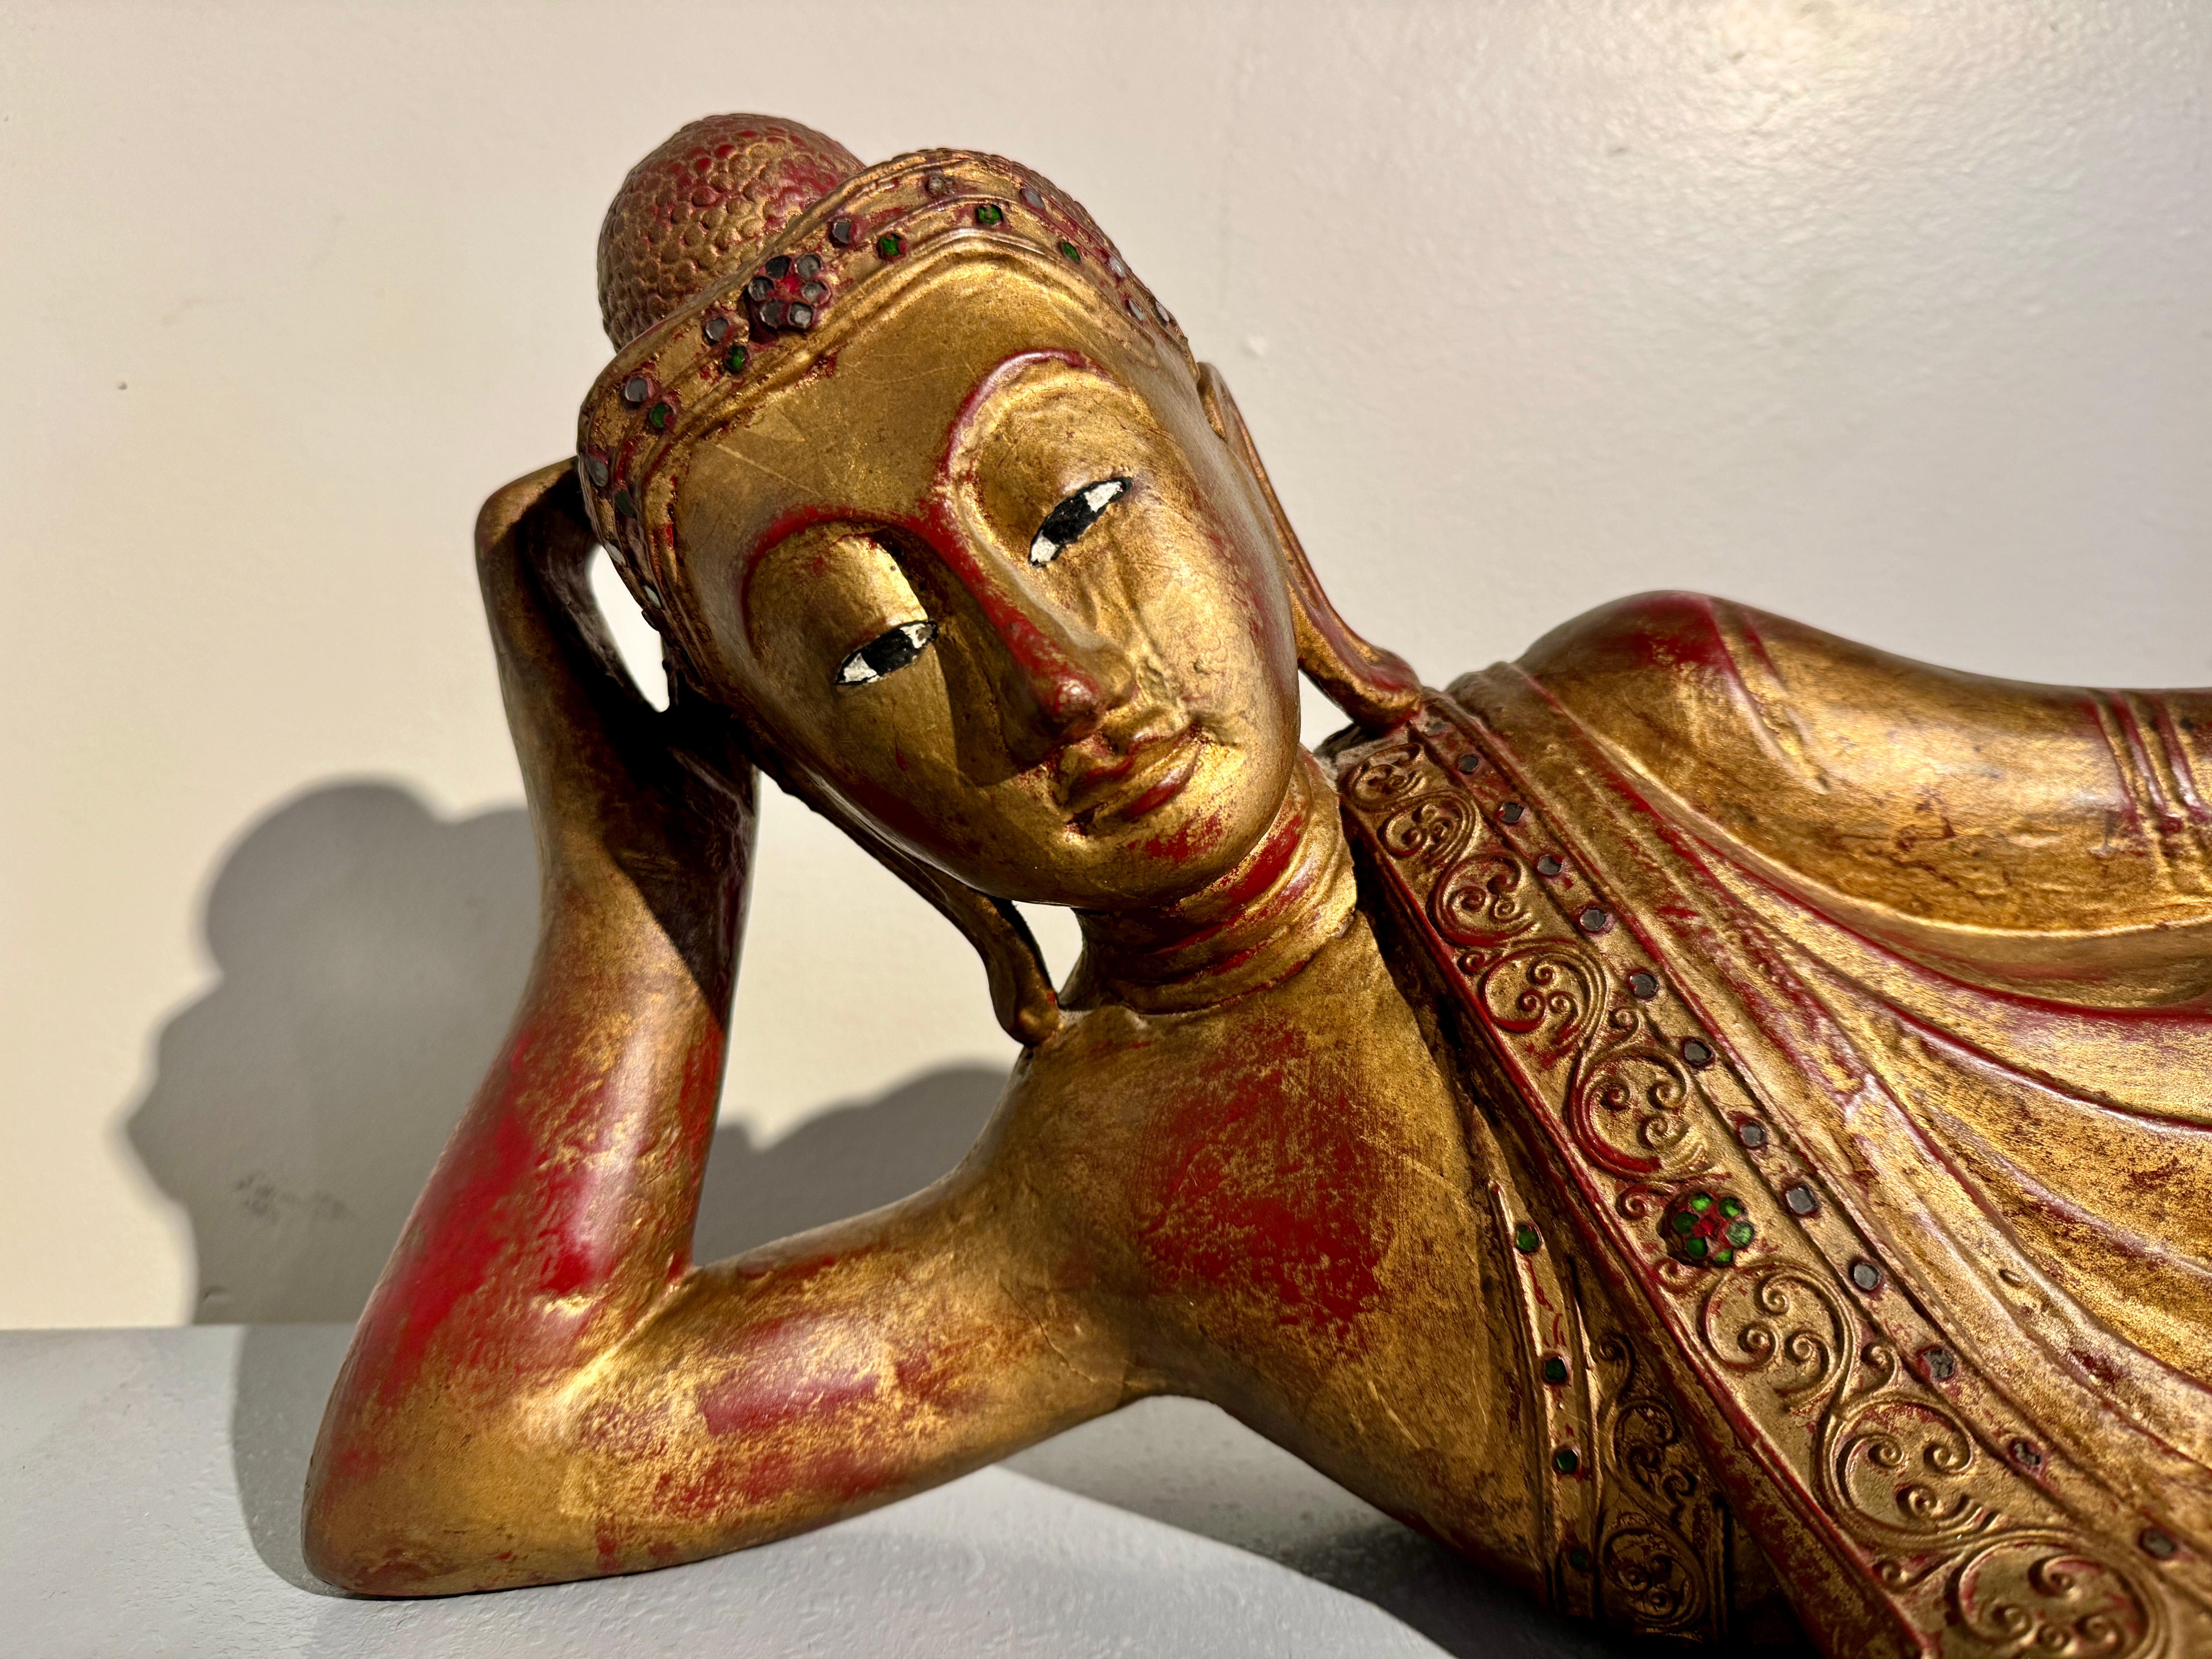 A charming vintage Burmese Mandalay Style carved, lacquered, and gilt wood figure of a reclining Buddha, 1970's, Burma.

The delightful Buddha figure is portrayed resting comfortably and elegantly on his side, supporting his weight on one elbow, his